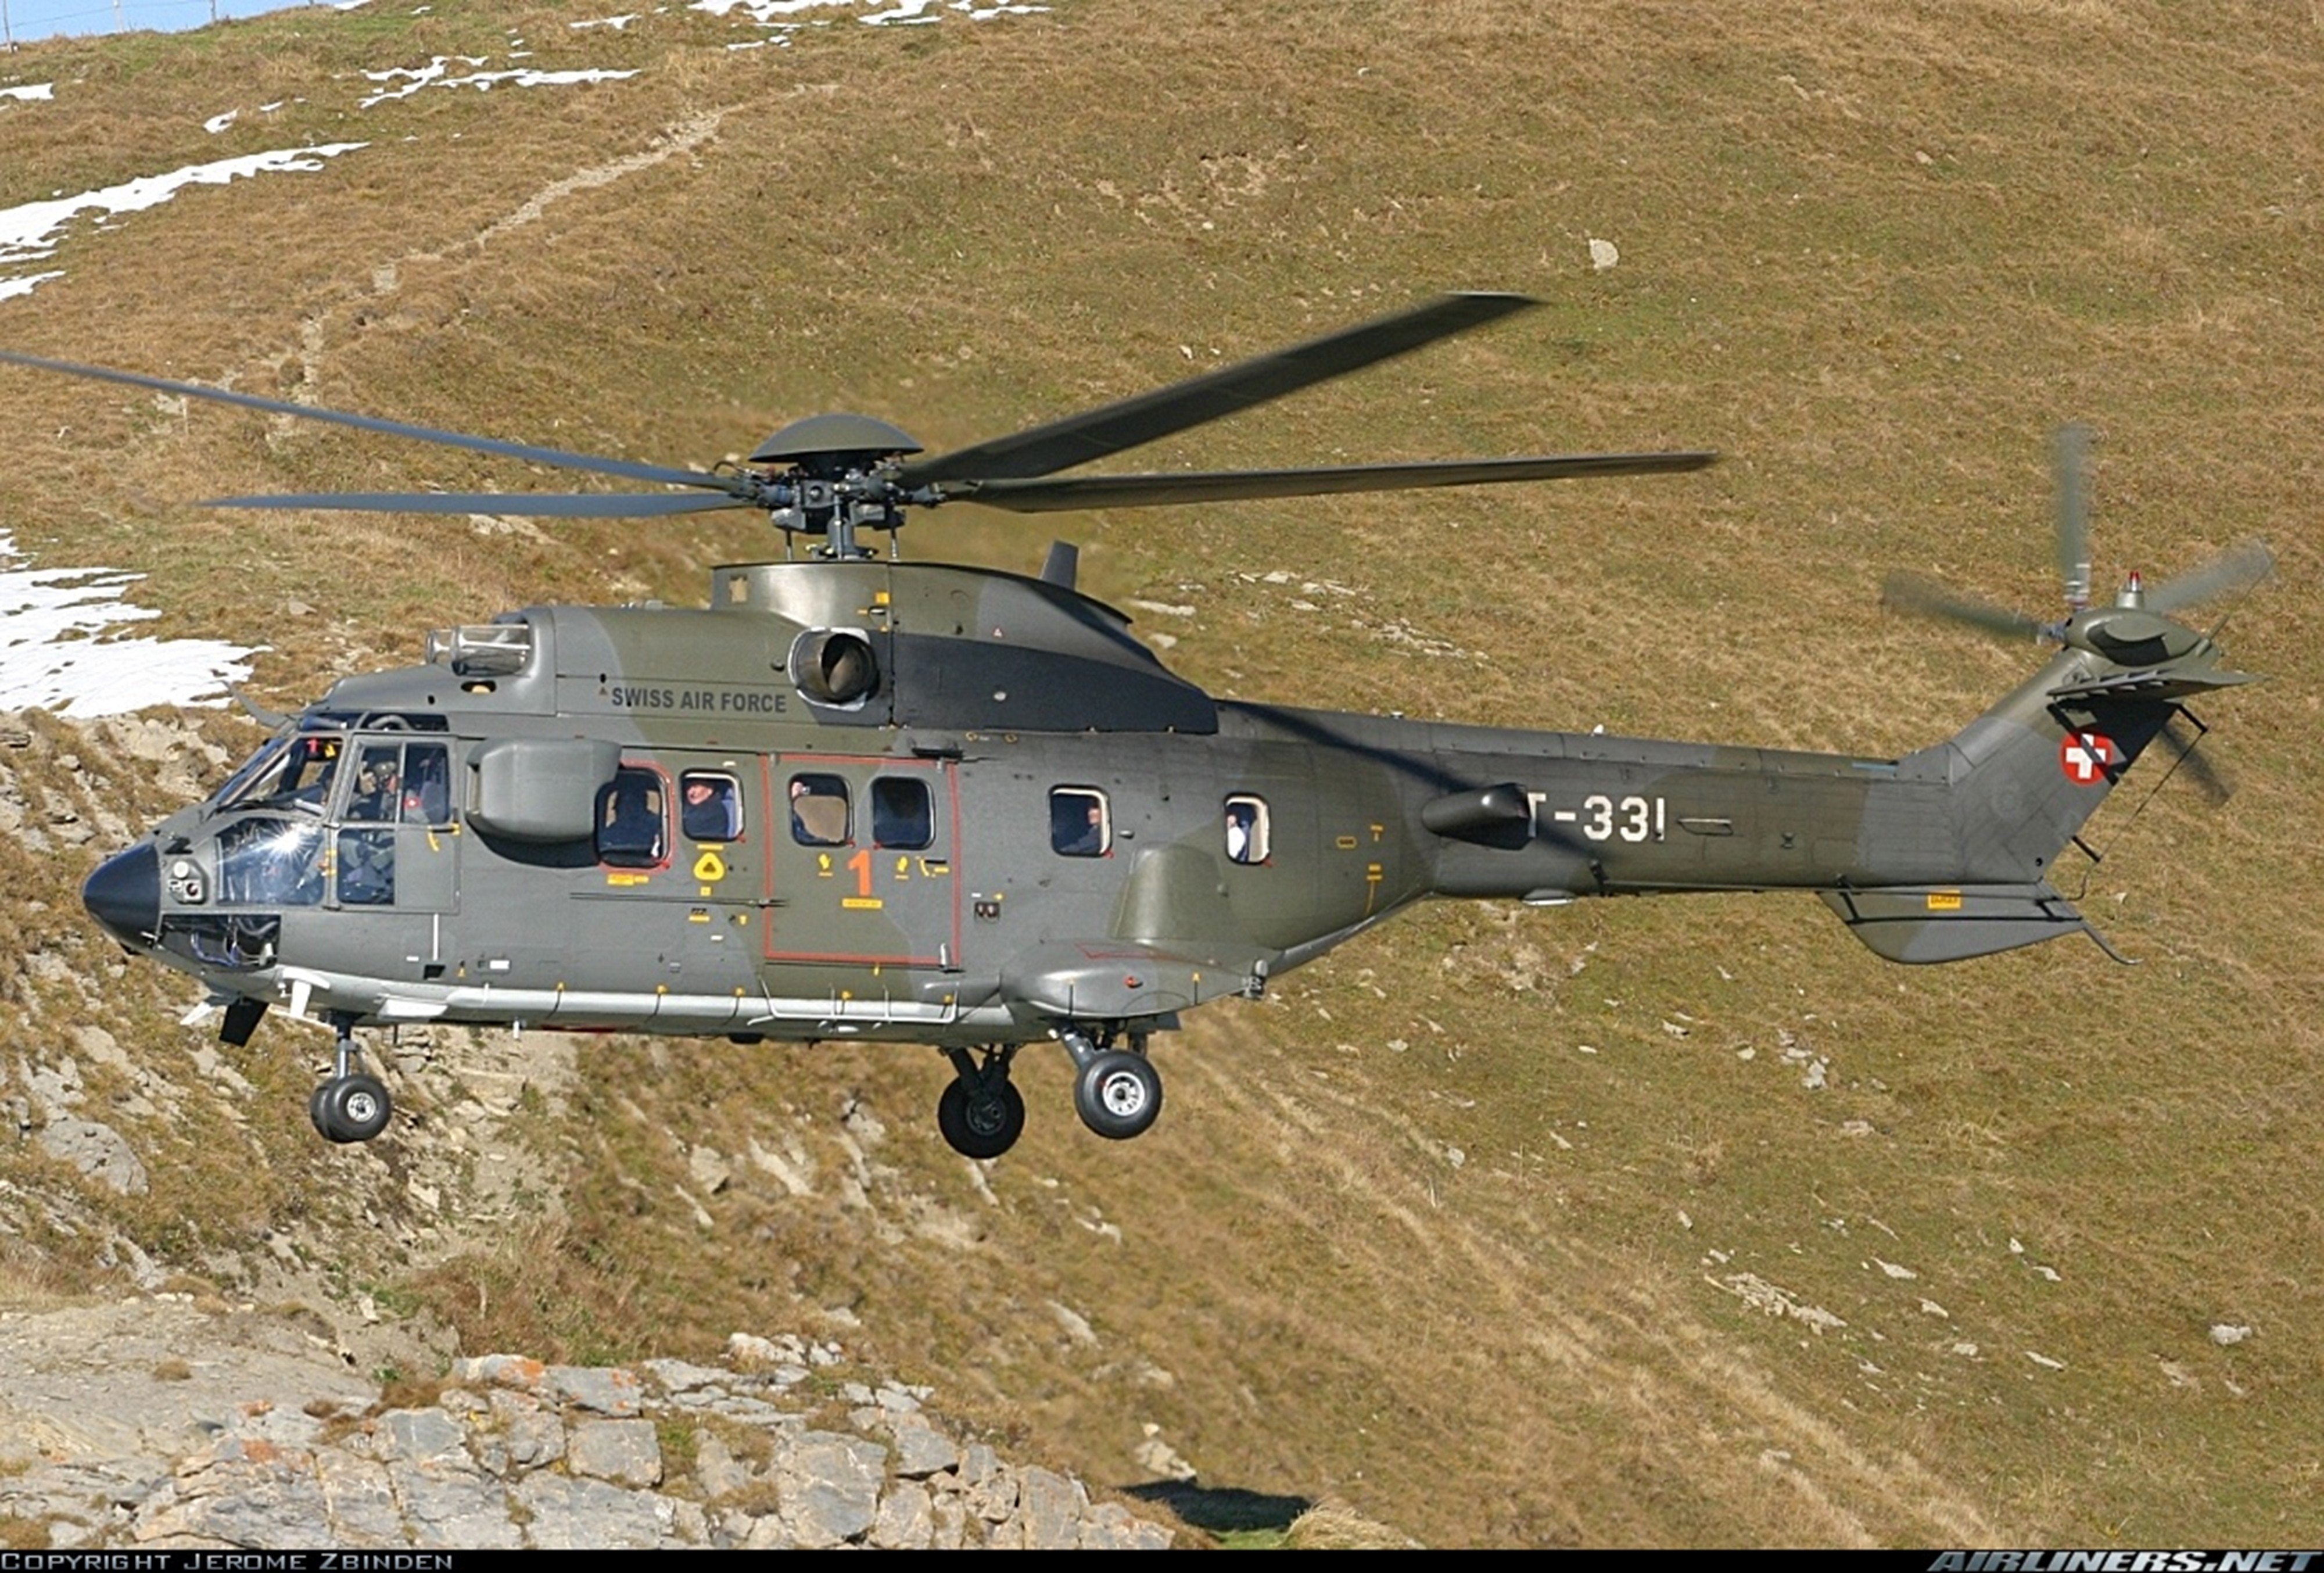 helicopter, Aircraft, Super, Puma, Transport, Military, Swiss, Air, Force, Switzerland Wallpaper